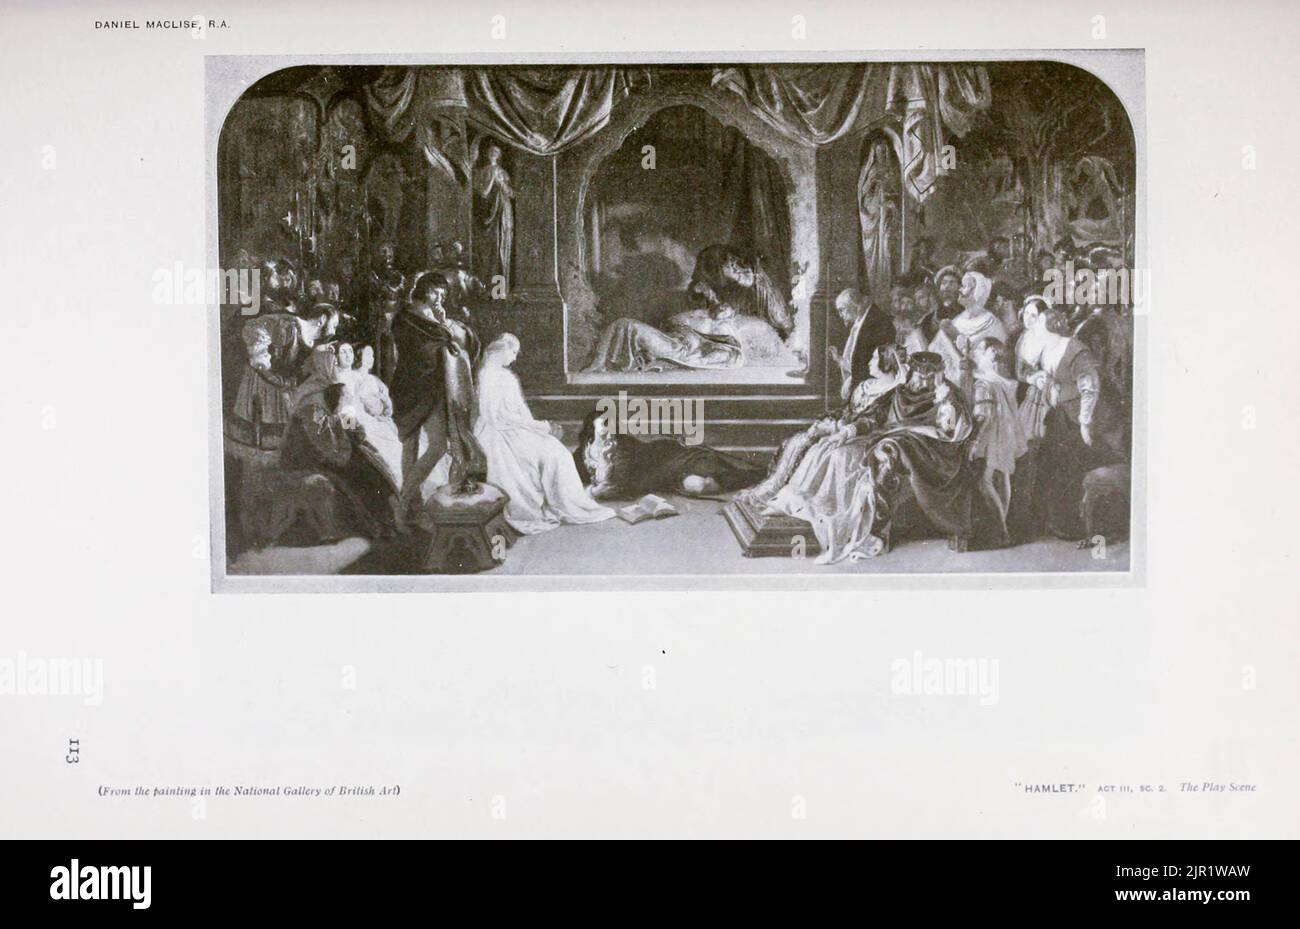 Hamlet act iii sc 2 The Play Scene by Daniel Maclise from the book '  Shakespeare in pictorial art ' by Salaman, Malcolm Charles, 1855-1940; Holme, Charles, 1848-1923 Publication date 1916 Publisher London, New York [etc.] : 'The Studio' ltd. Stock Photo